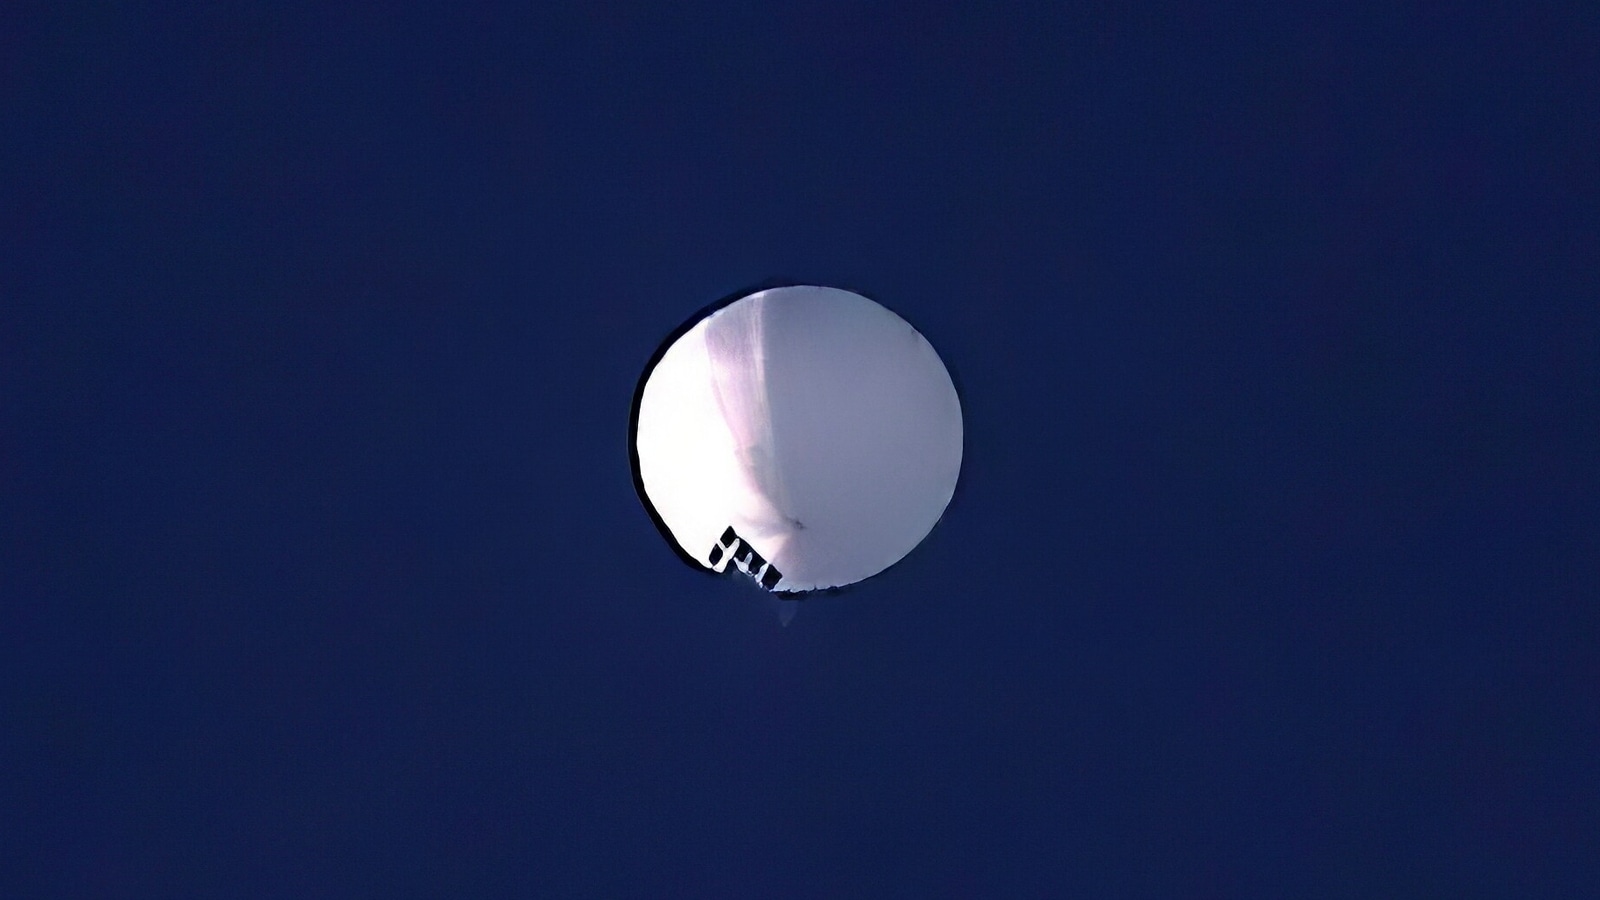 Chinese ‘spy balloon’ spotted in American skies, Pentagon says